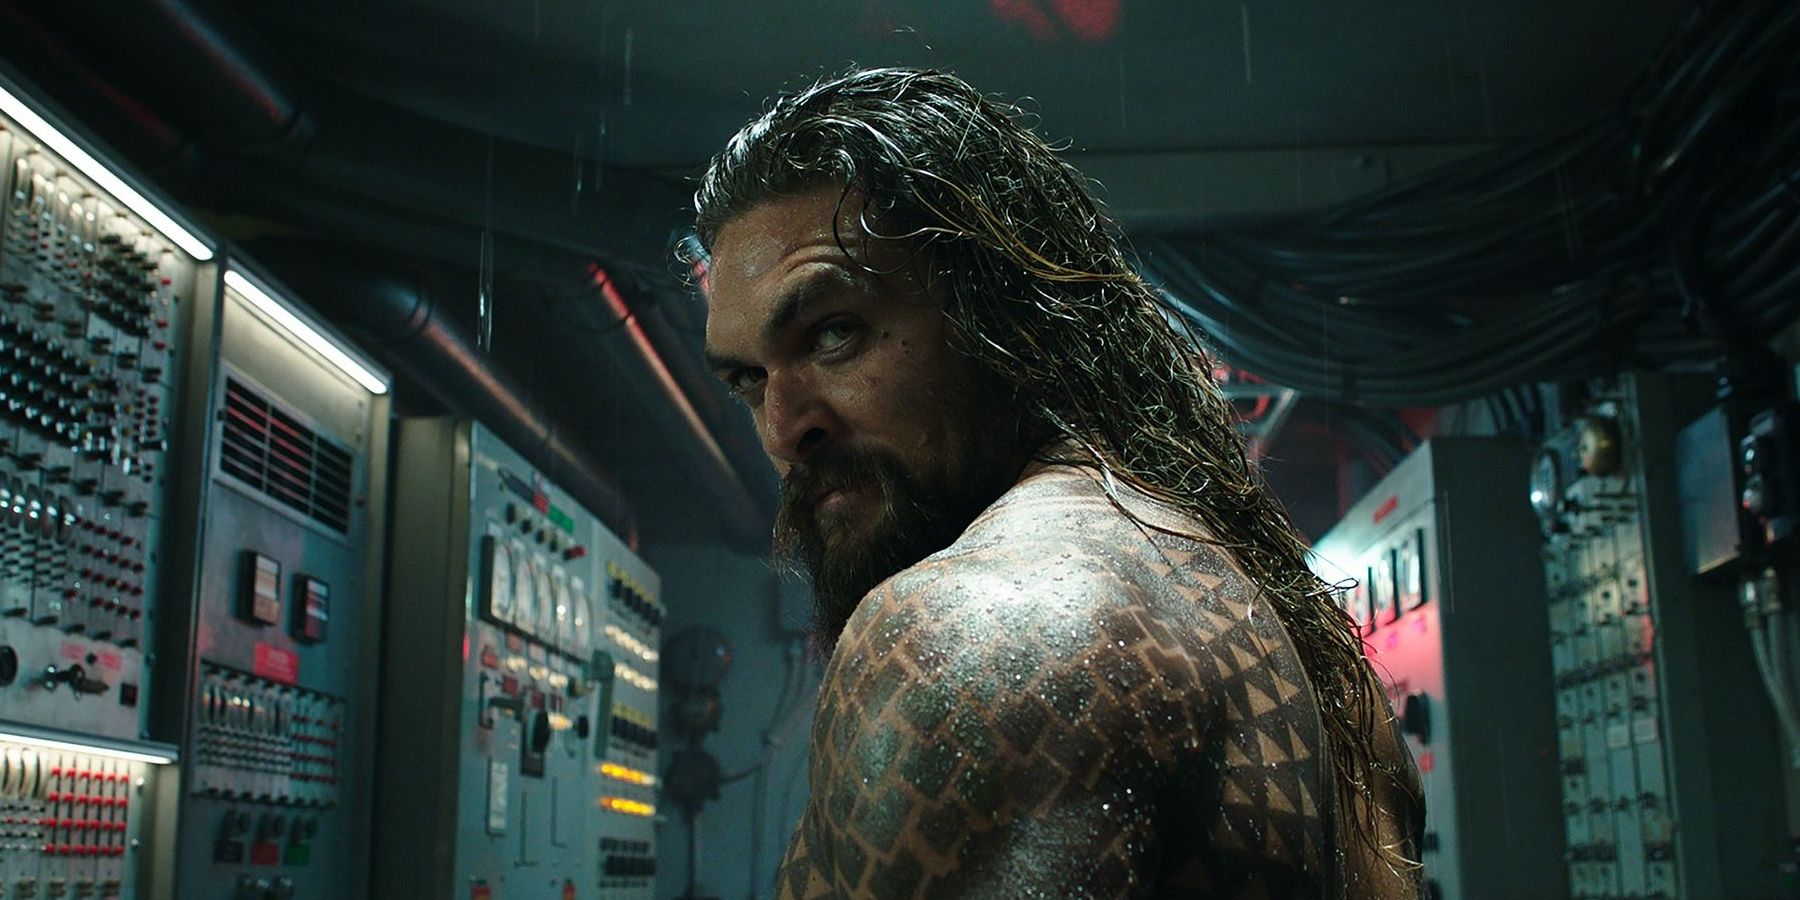 Aquaman looks back at the camera while in a room